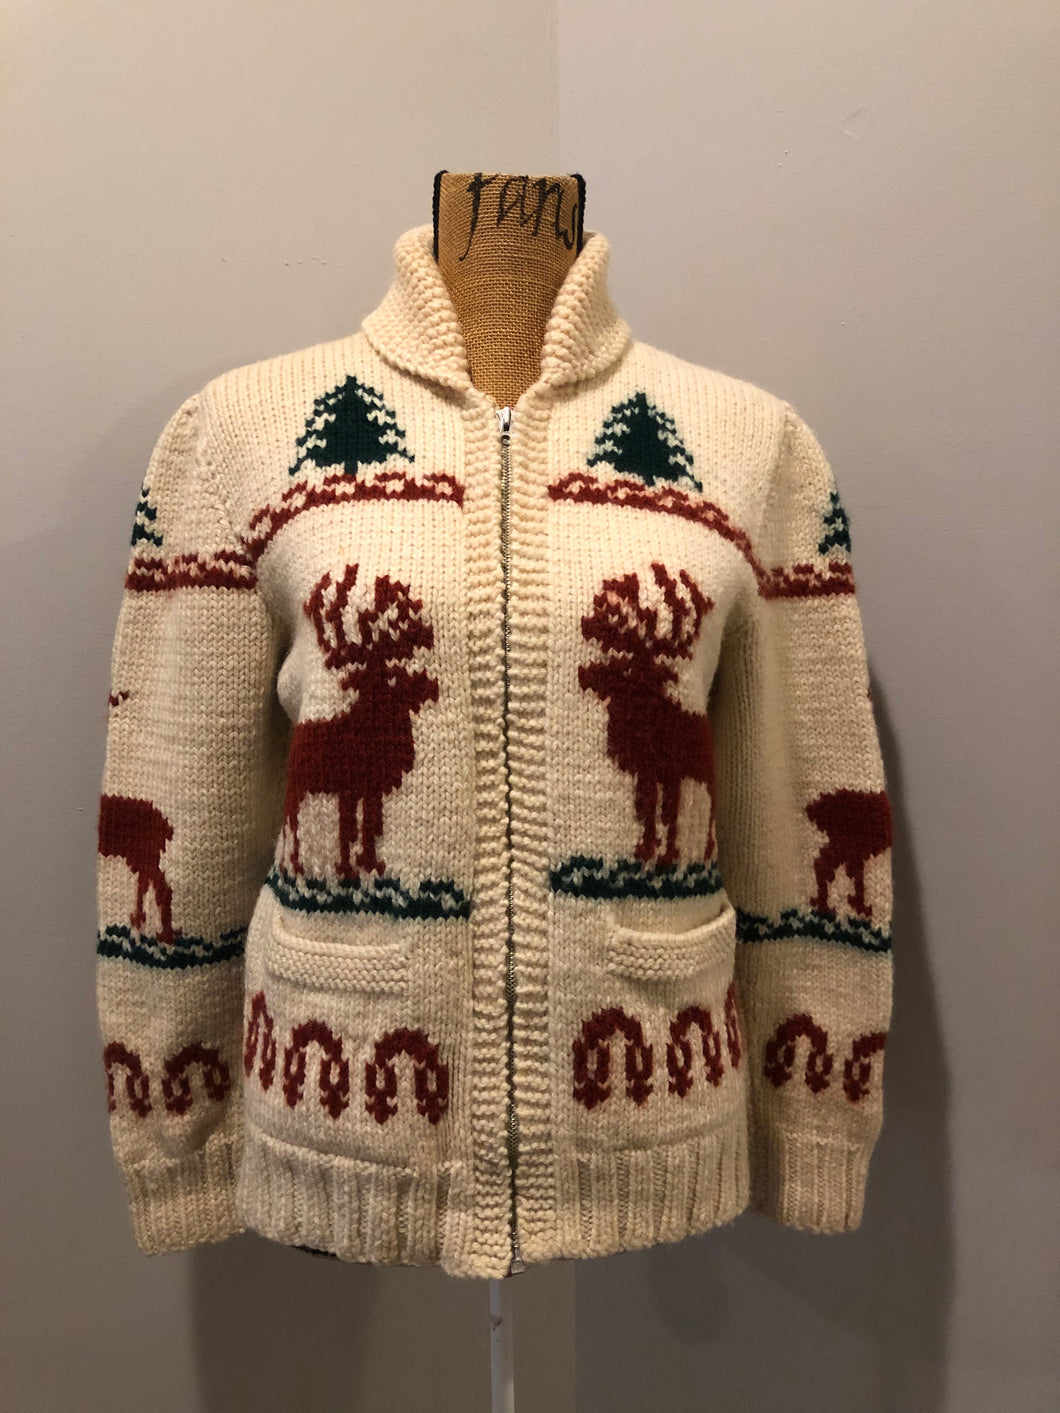 Kingspier Vintage - Mary Maxim hand knit zip cardigan in cream color wool with moose design, zipper and collar. Made in Nova Scotia.